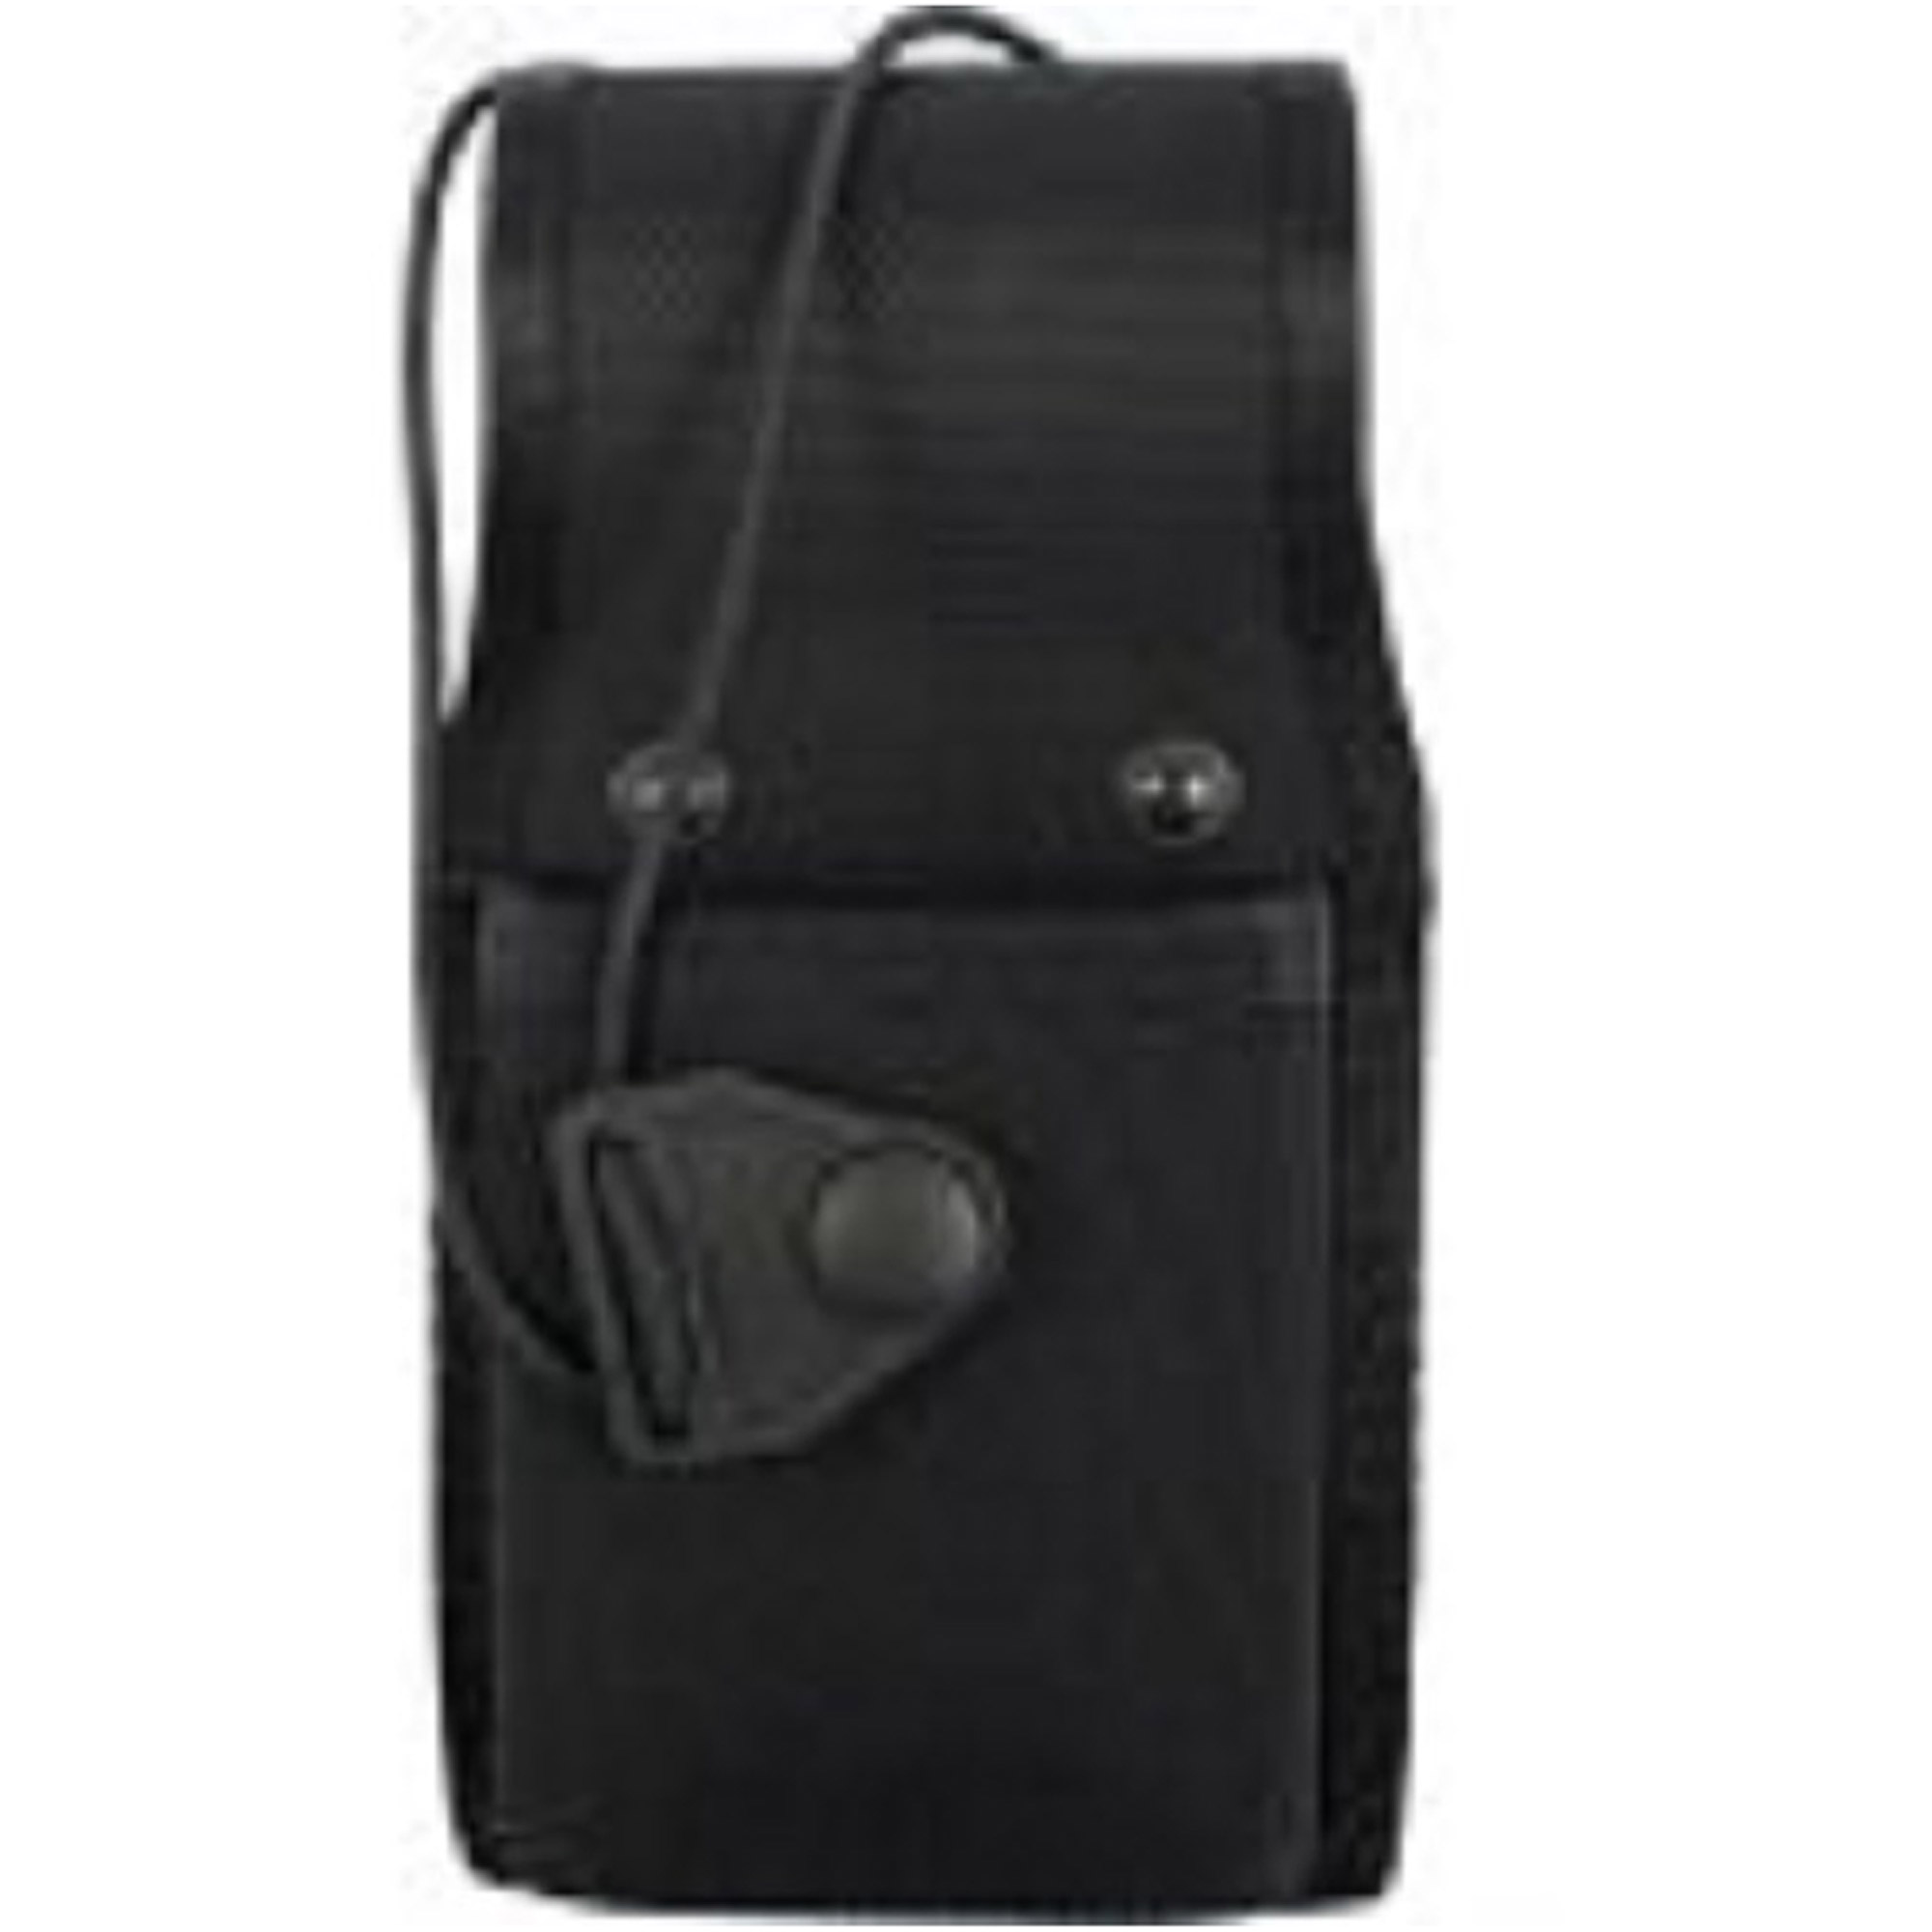 Gould Goodrich K616 Epaulet Microphone Case Holds All Popular Microphone Styles - image 1 of 2